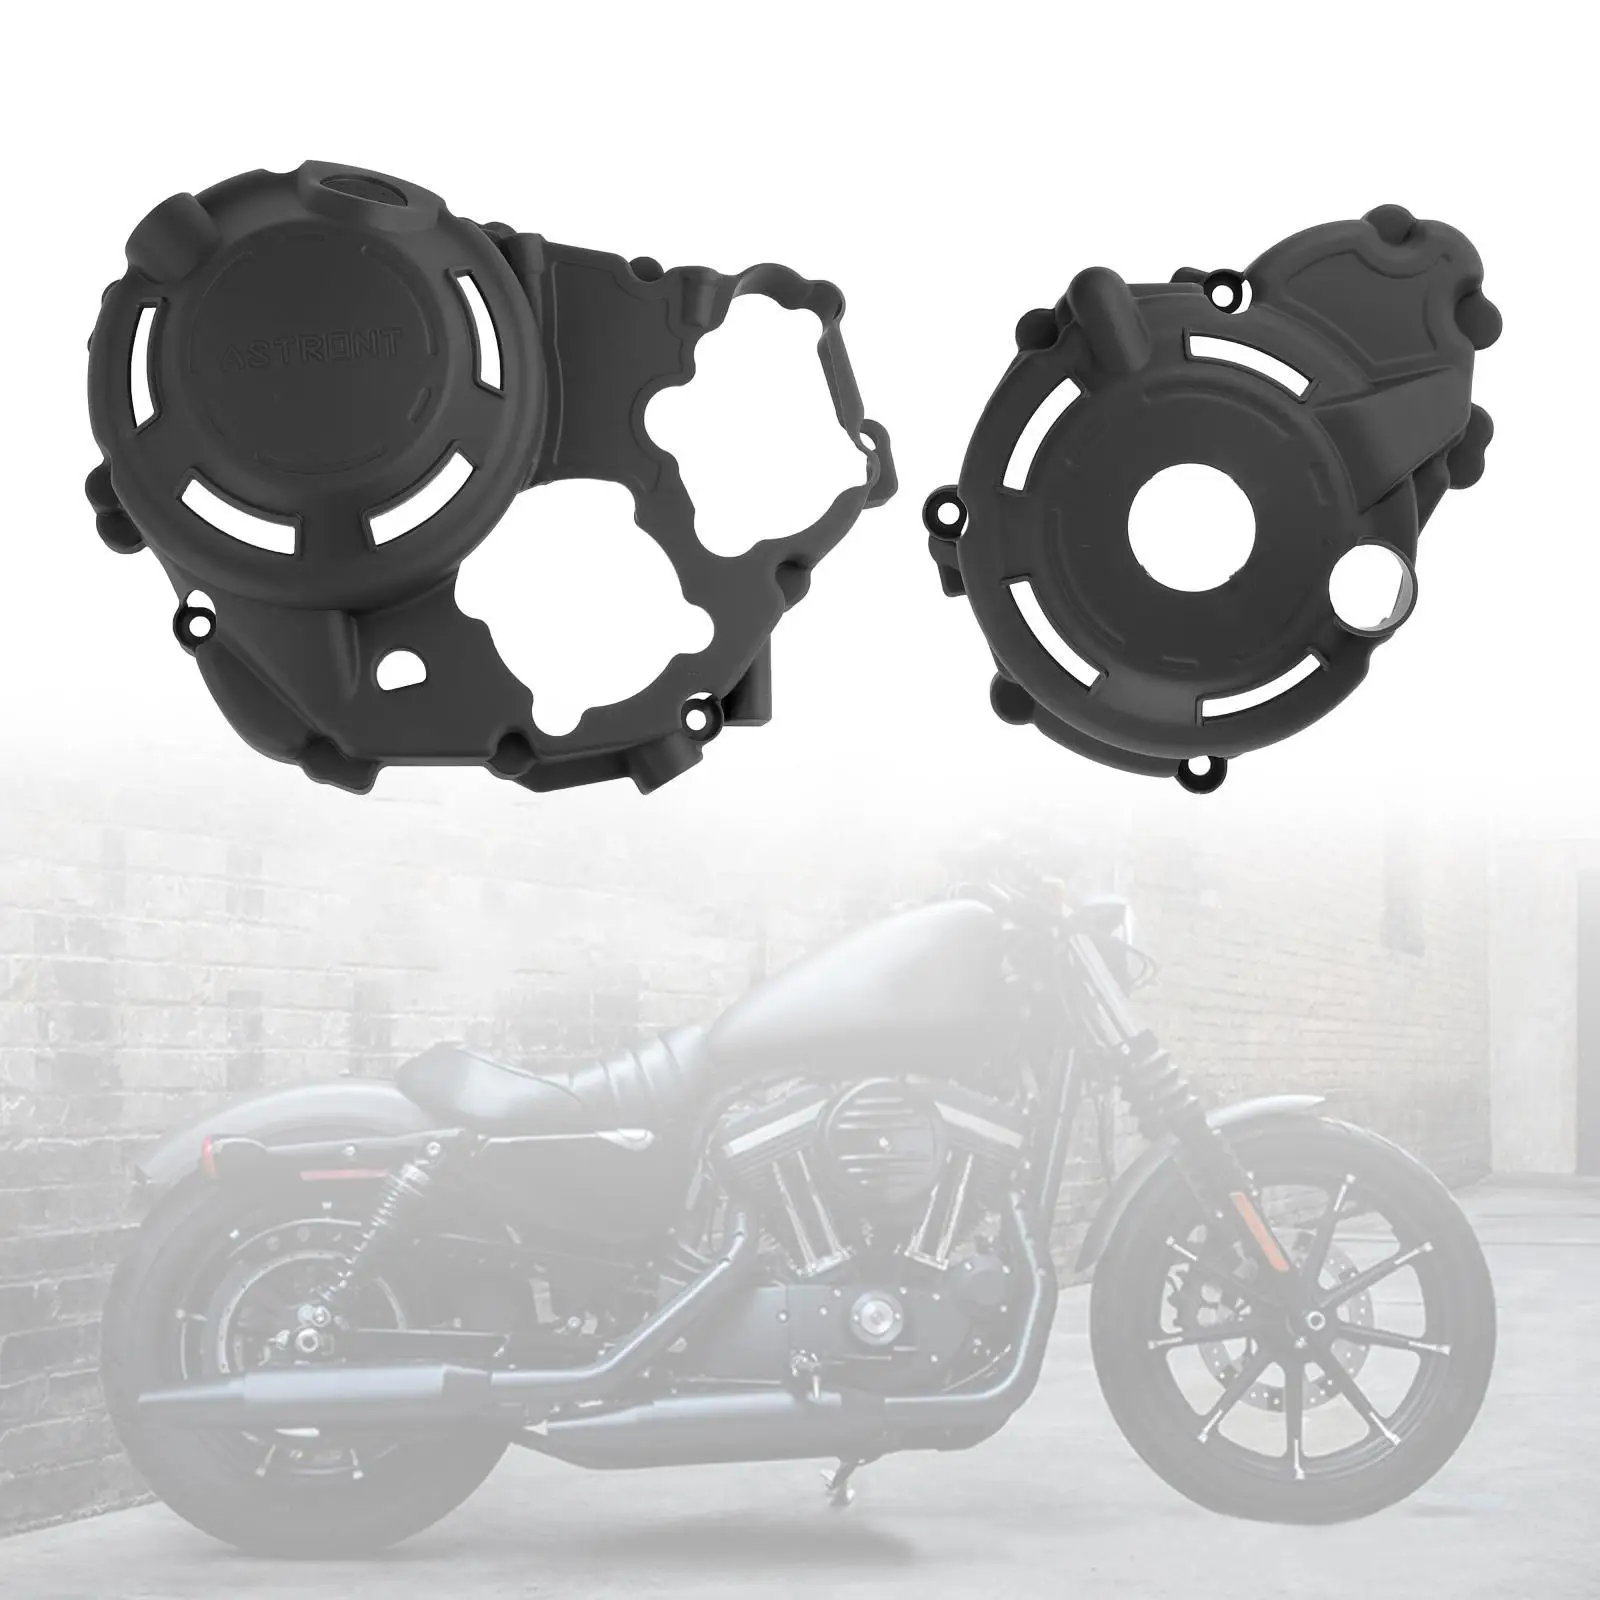 Motorcycle Engine Protector Cover Accessories Easy to Install Scratch Resistant